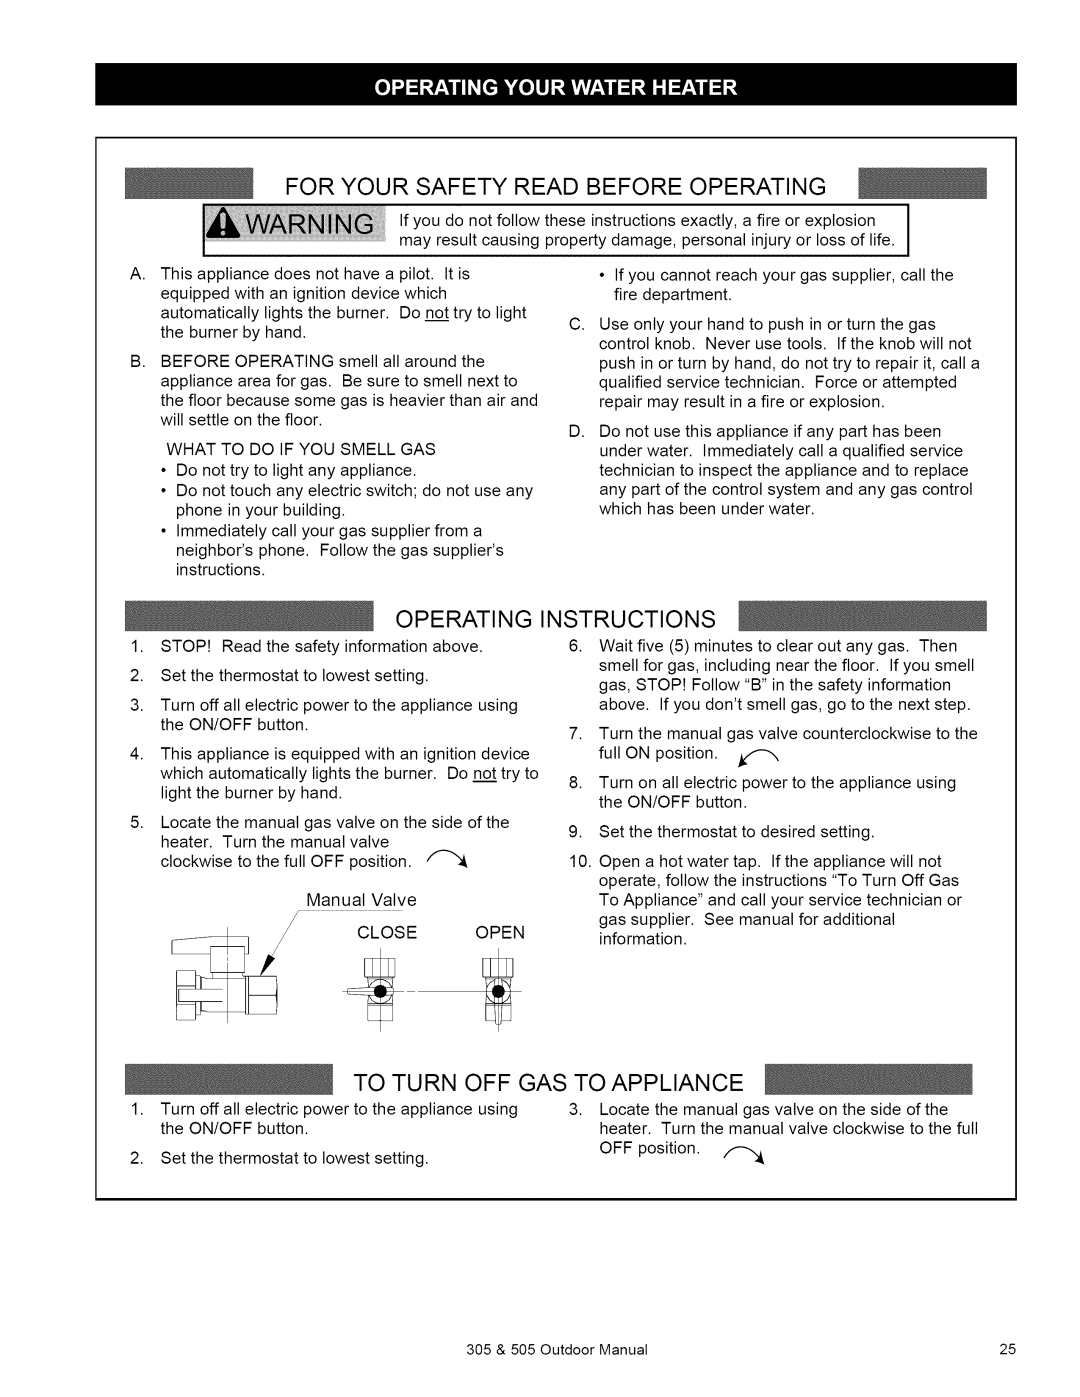 Kenmore 305, 505 owner manual For Your Safety Read Before Operating, Operating Instructions, To Turn Off Gas To Appliance 